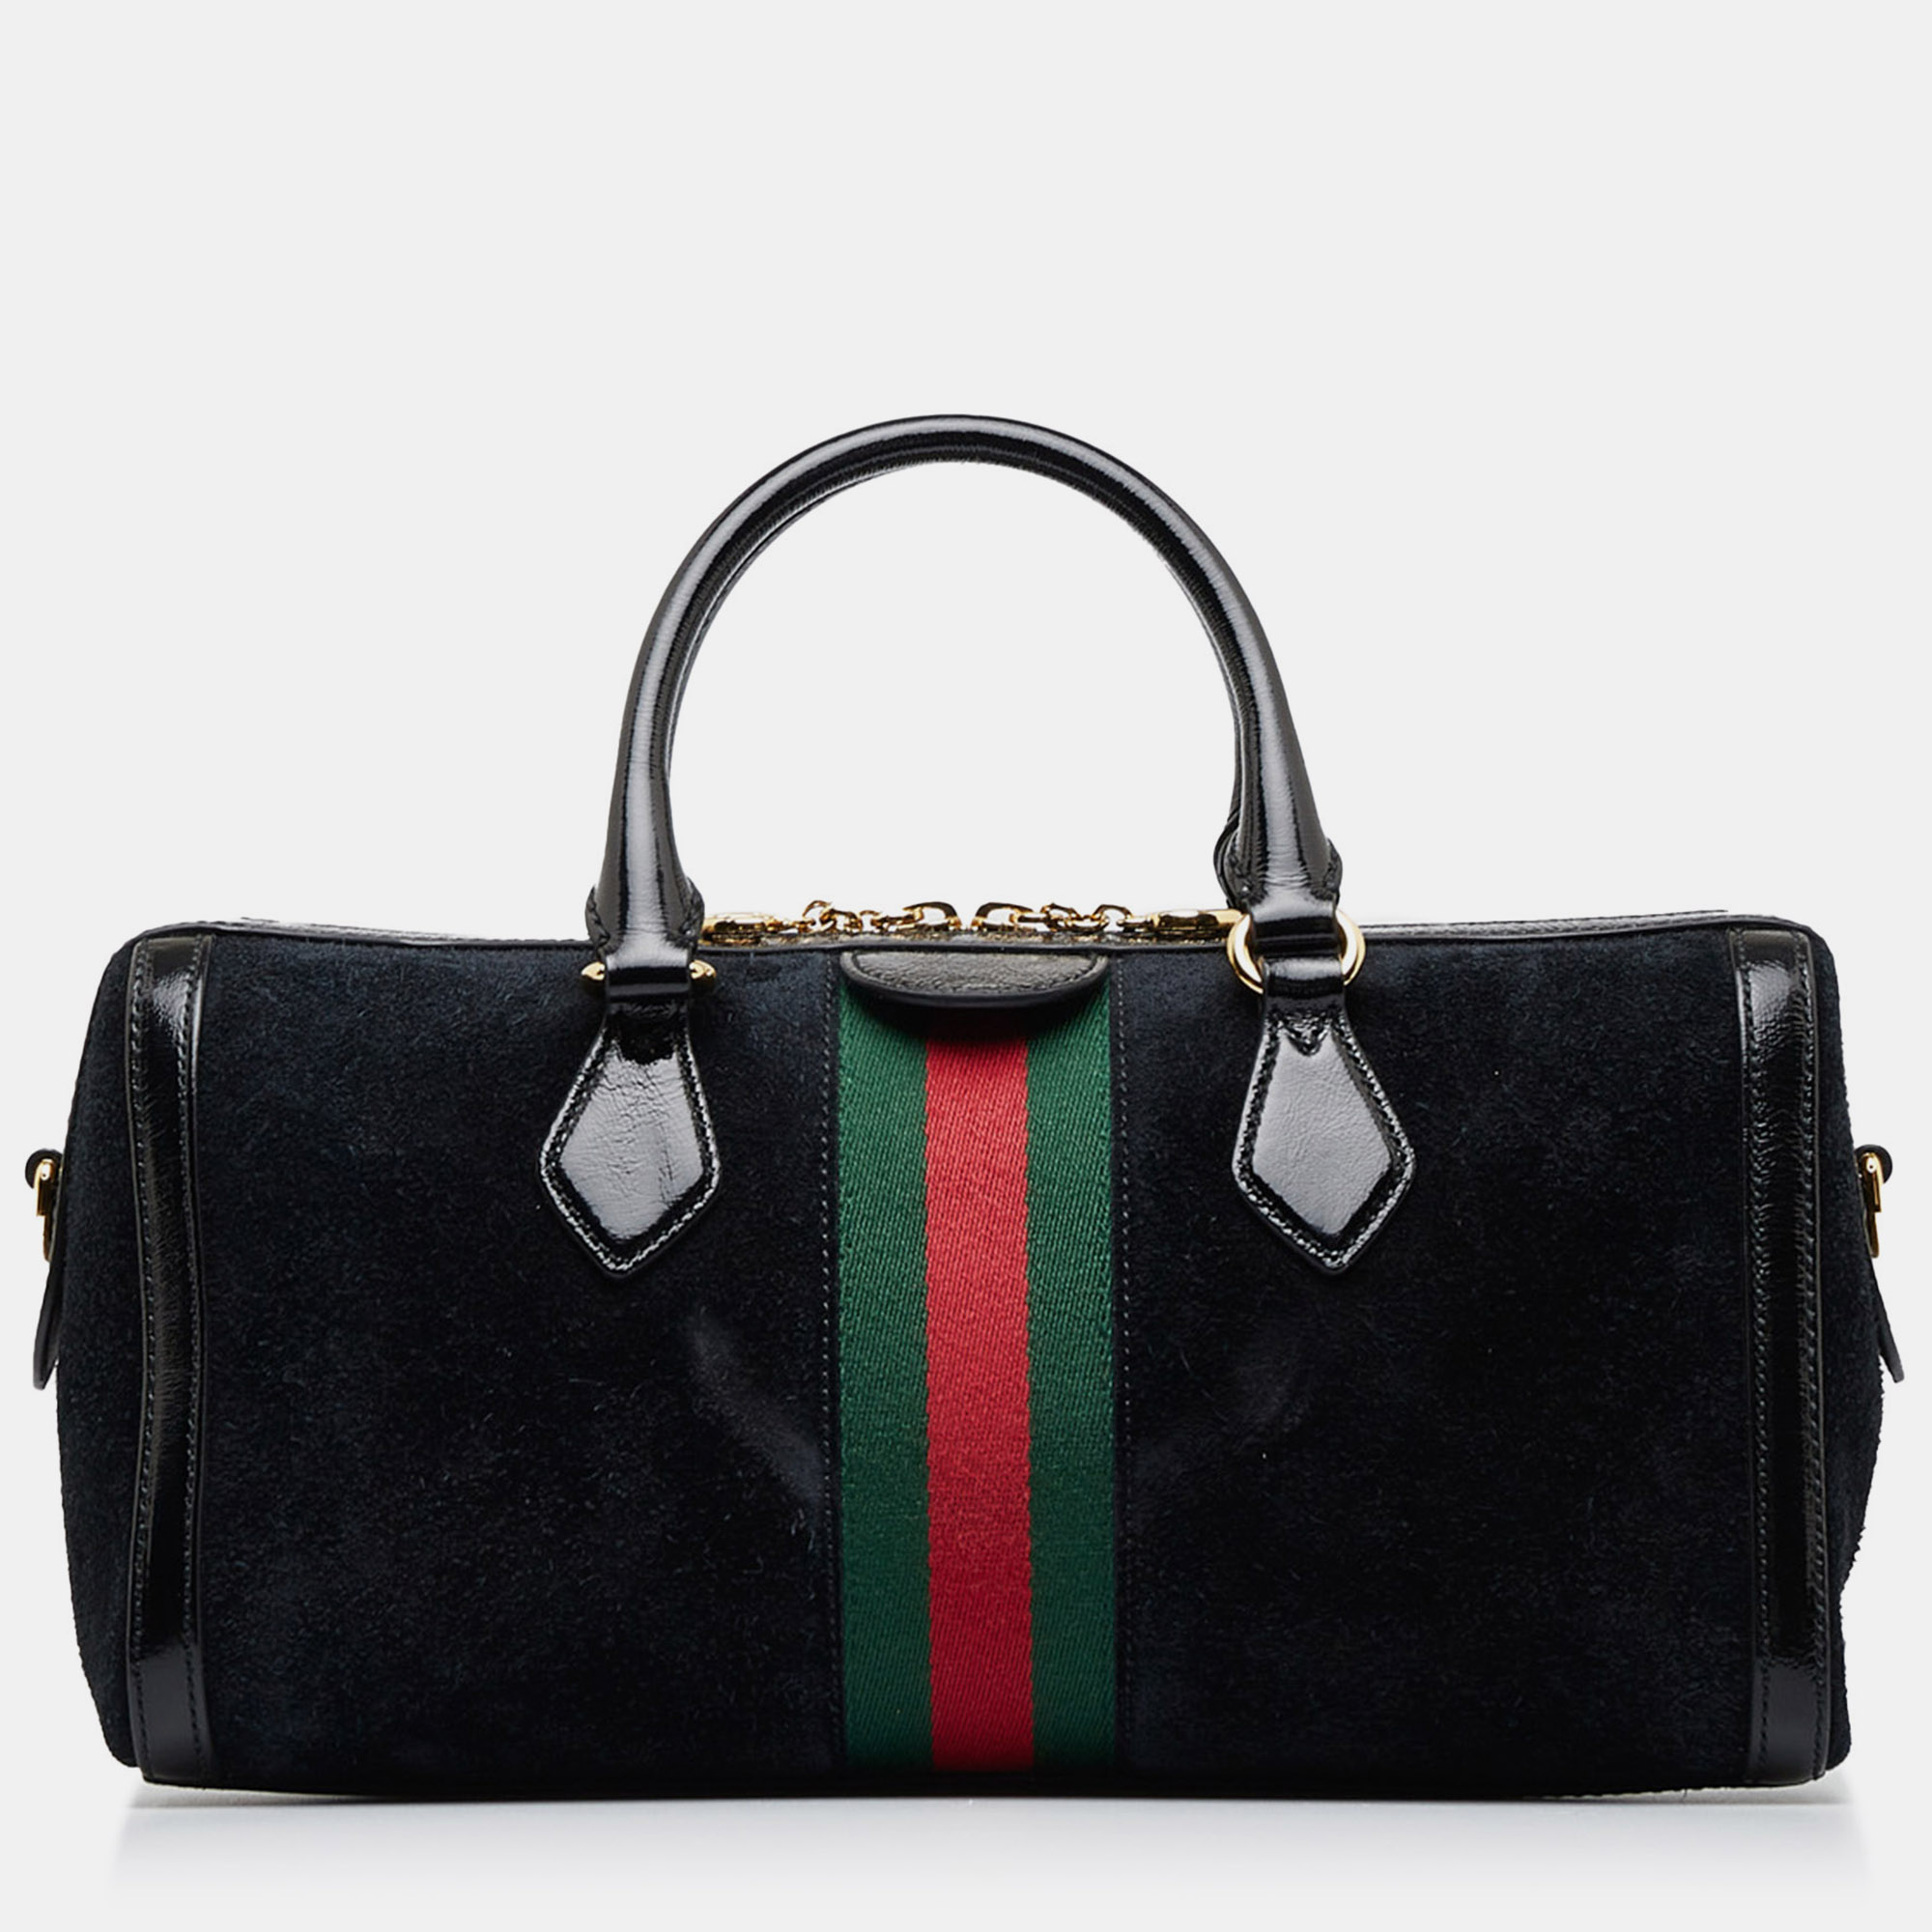 Gucci Black Leather Ophidia Suede Satchel